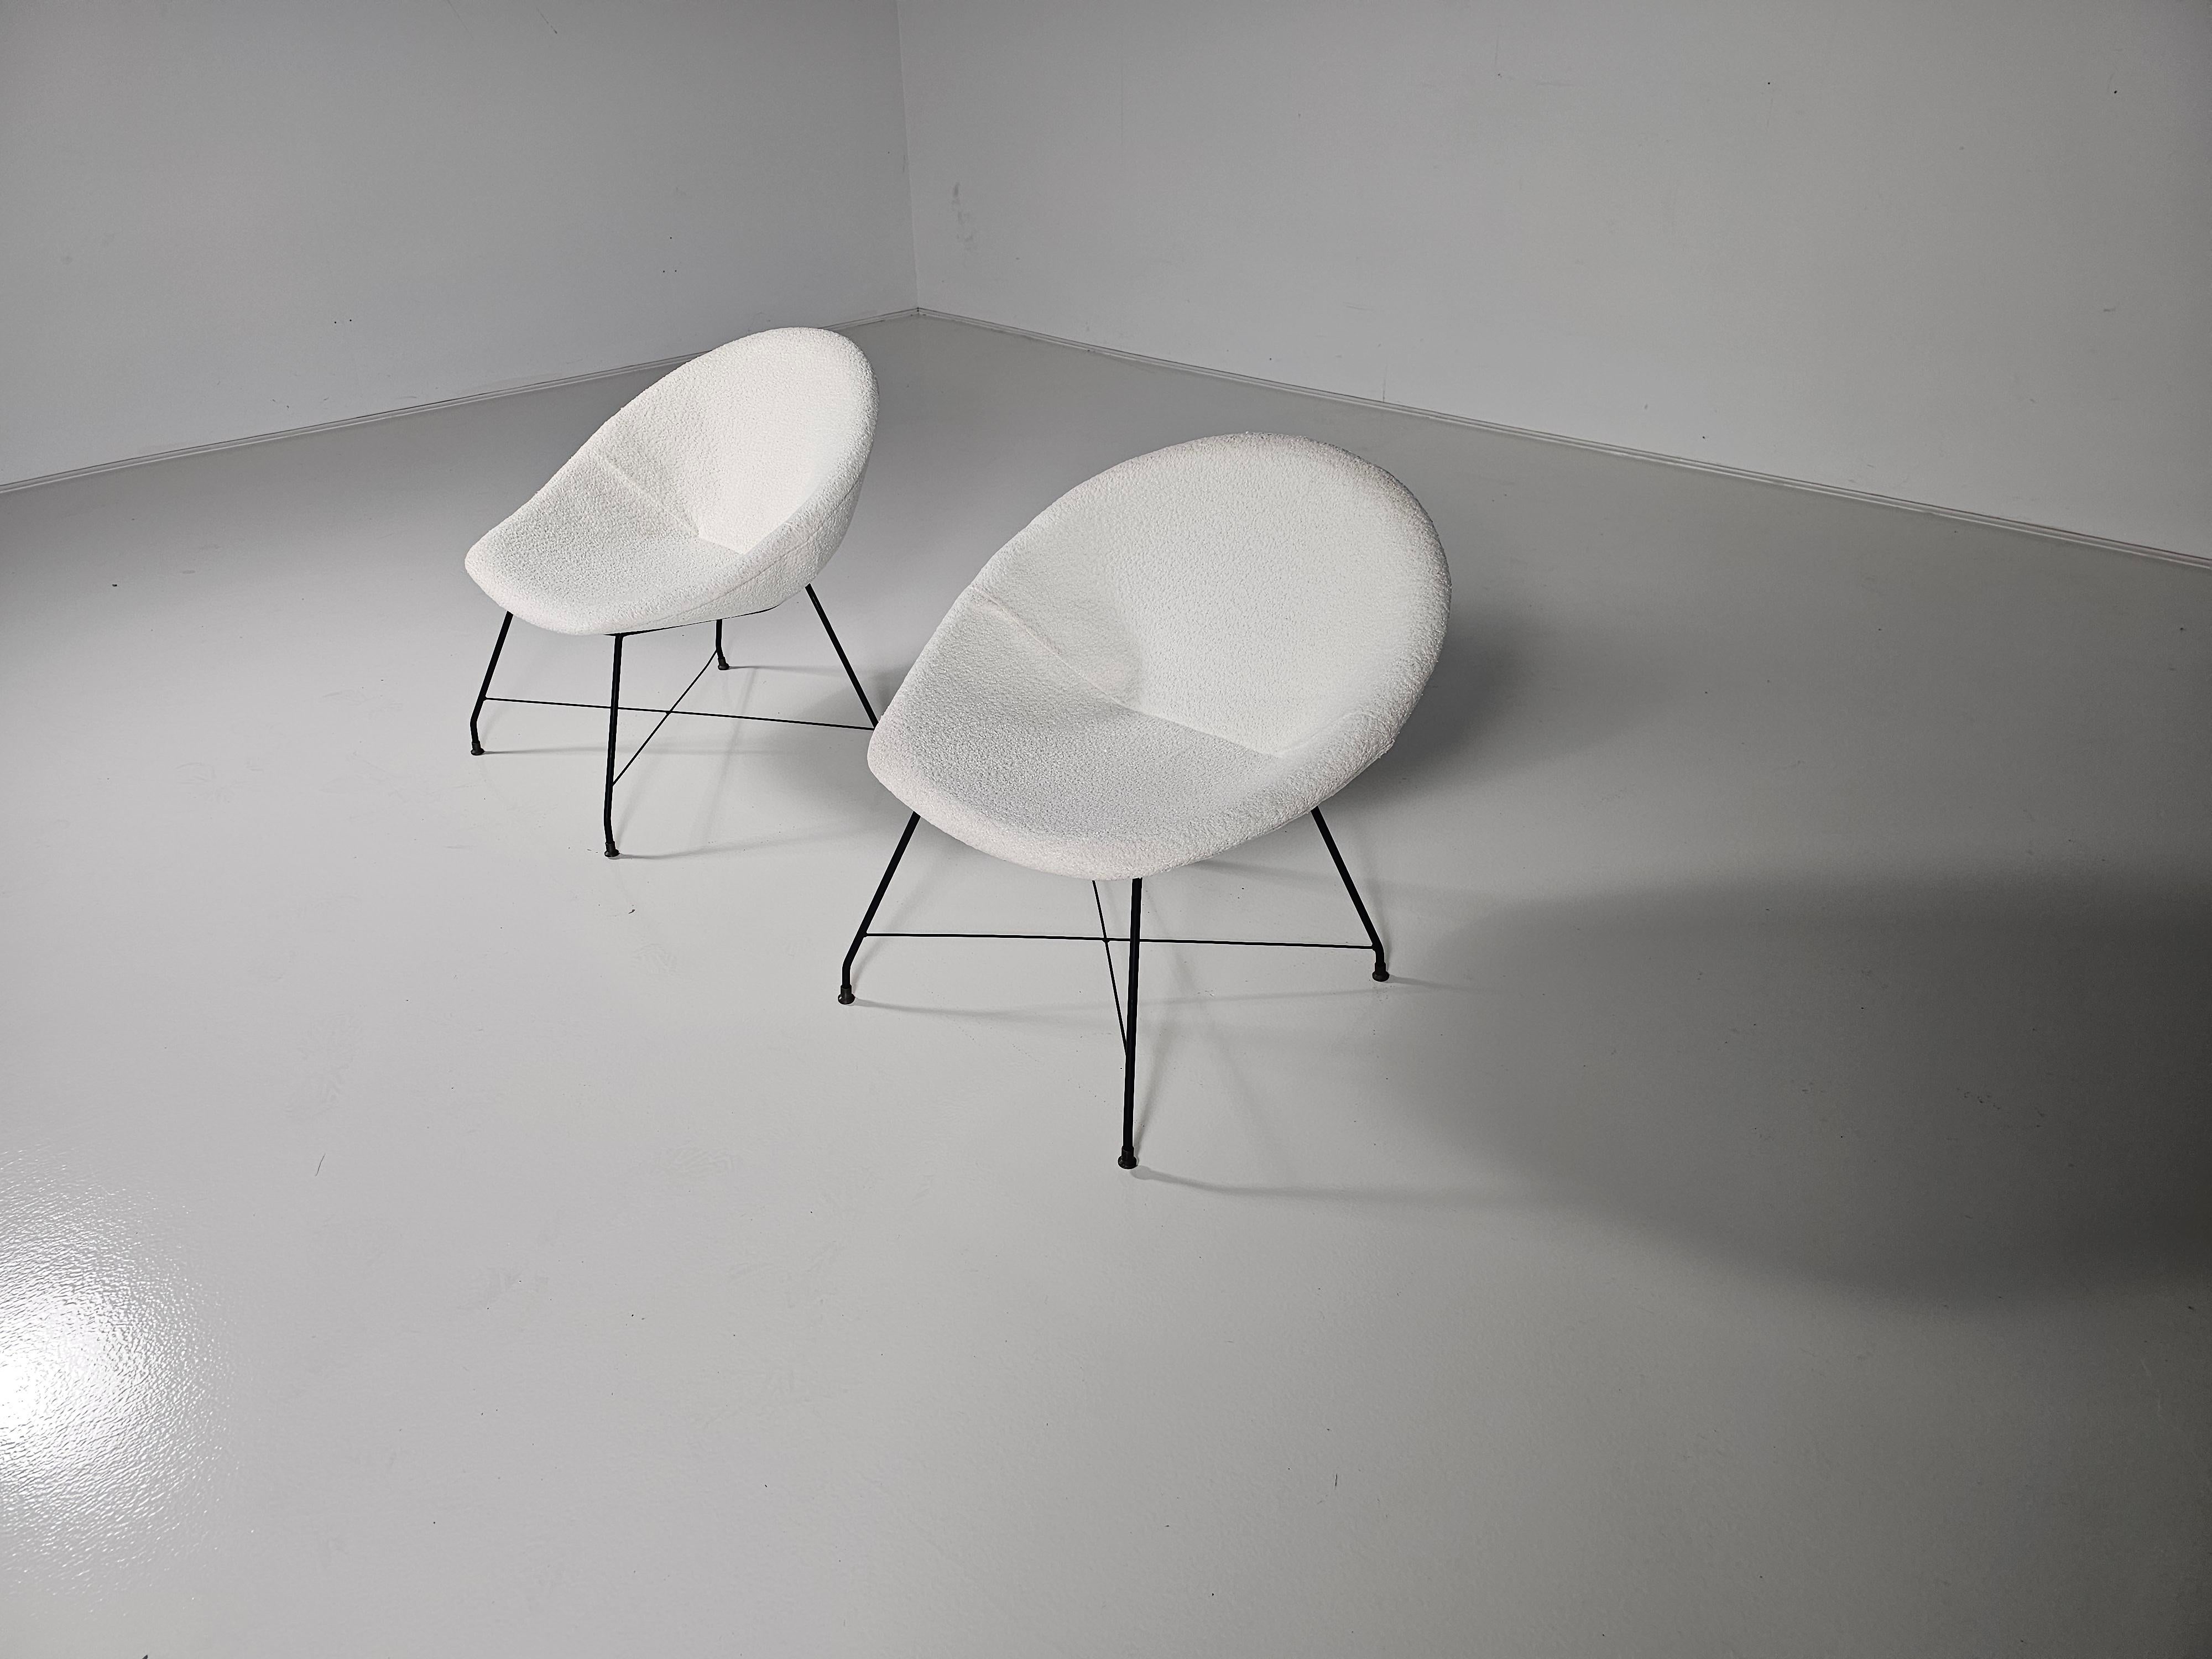 Steel ‘Minoletta’ Lounge Chairs by Augusto Bozzi for Saporiti, 1950s For Sale